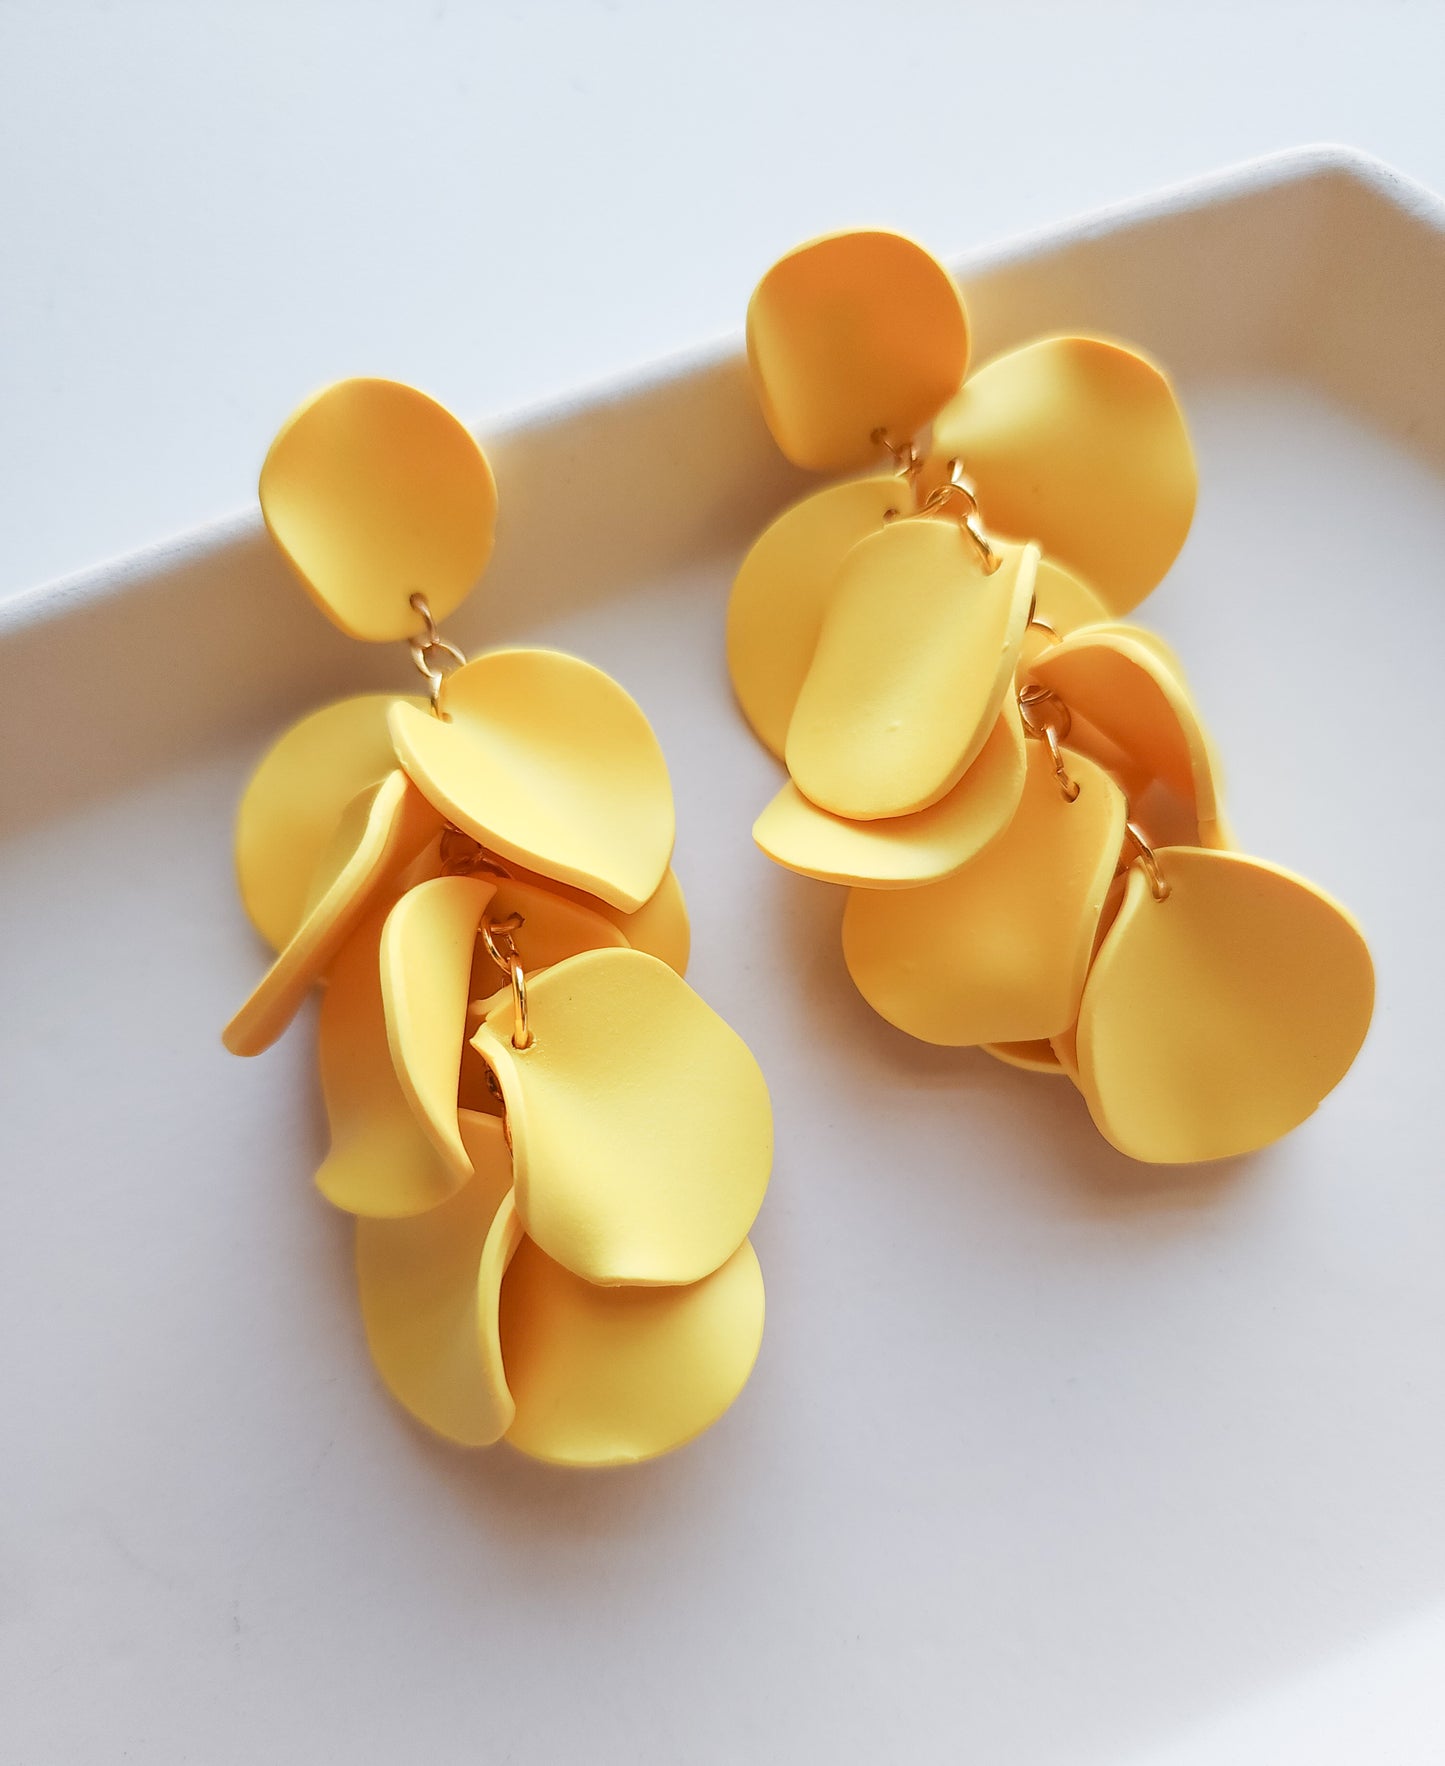 Yellow floral statement dangles